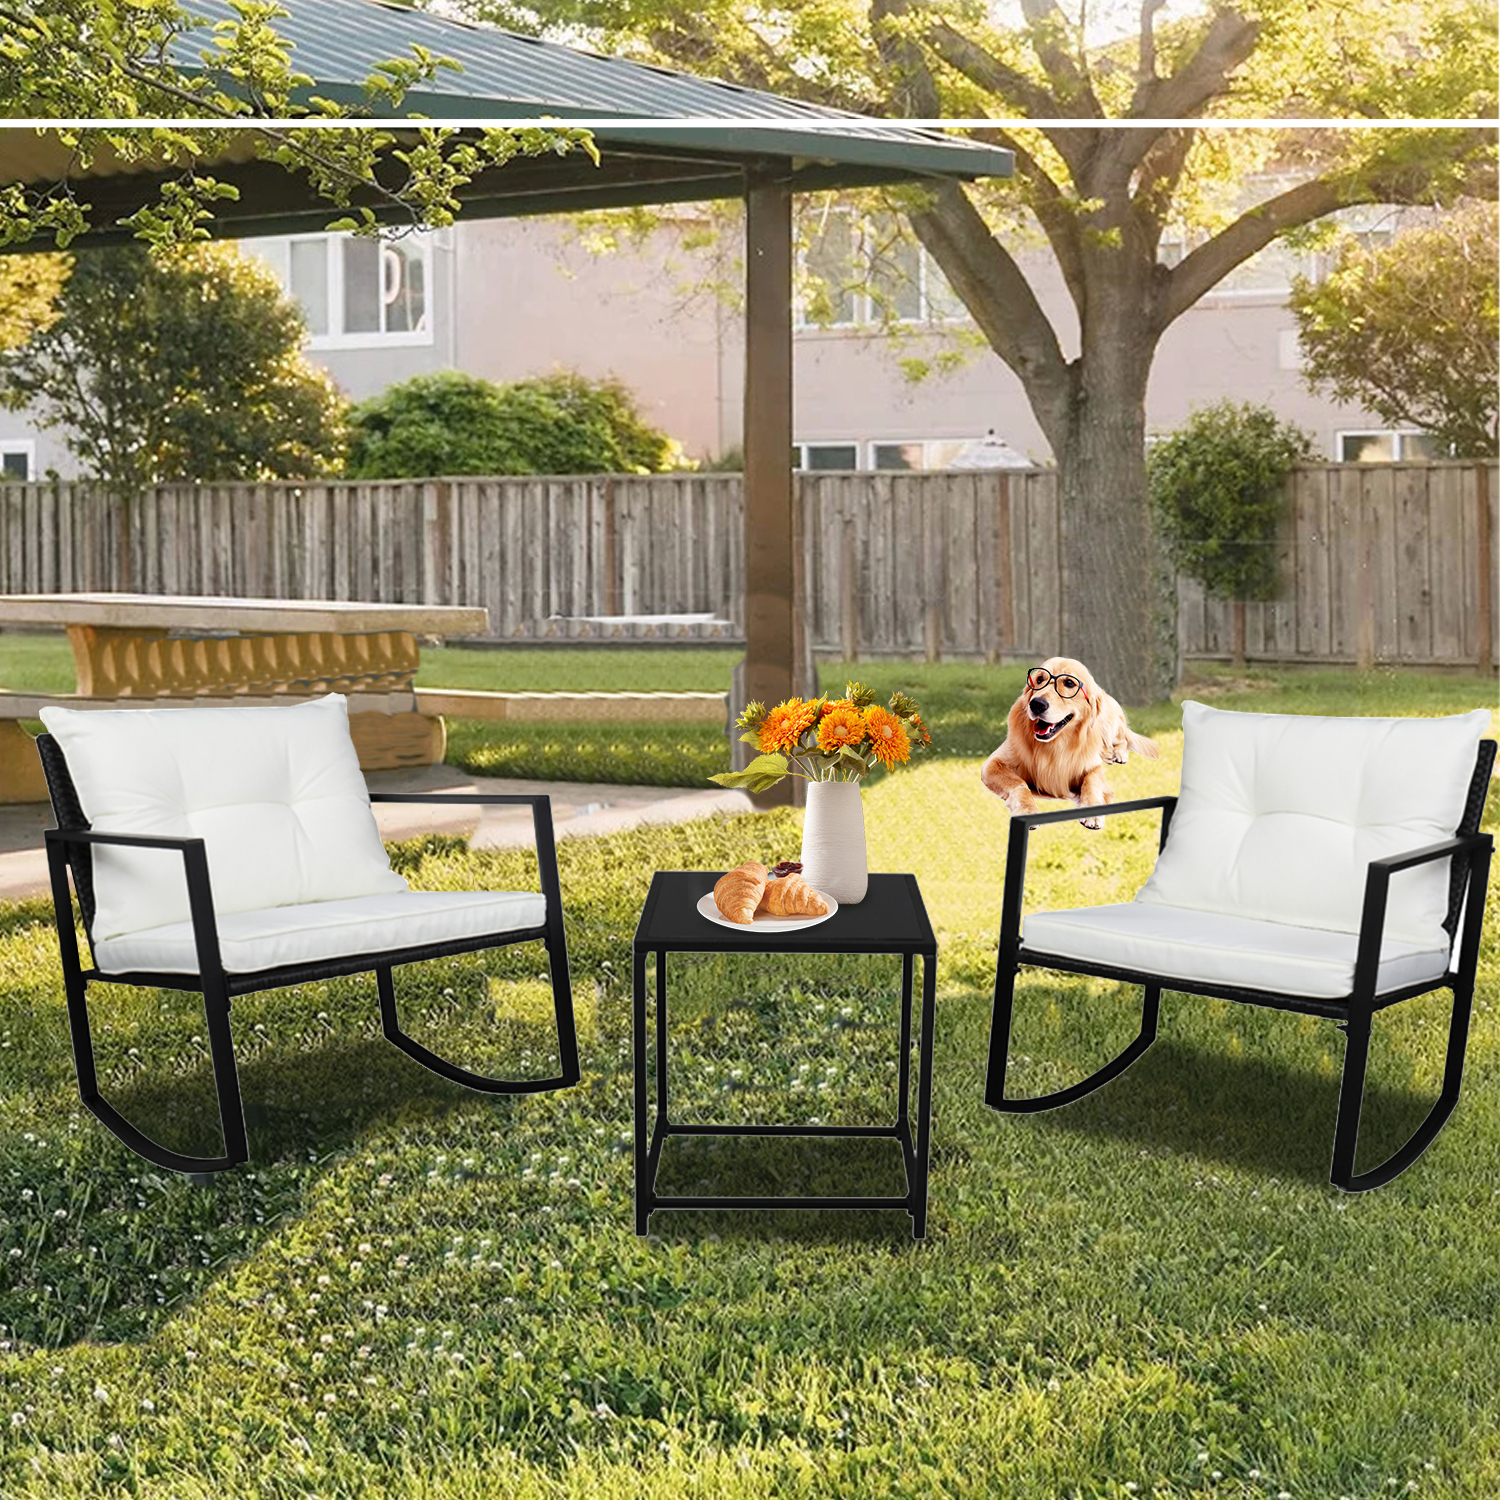 3 Piece Wicker Rocking Chair Set, Patio Furniture with Rocking Chairs and Coffee Table, Outdoor Rocking Chair Sets for Lawn, Yard, Garden, Rocker Bistro Set, Patio Lounge Chair, White Cushion, W10681 - image 2 of 9